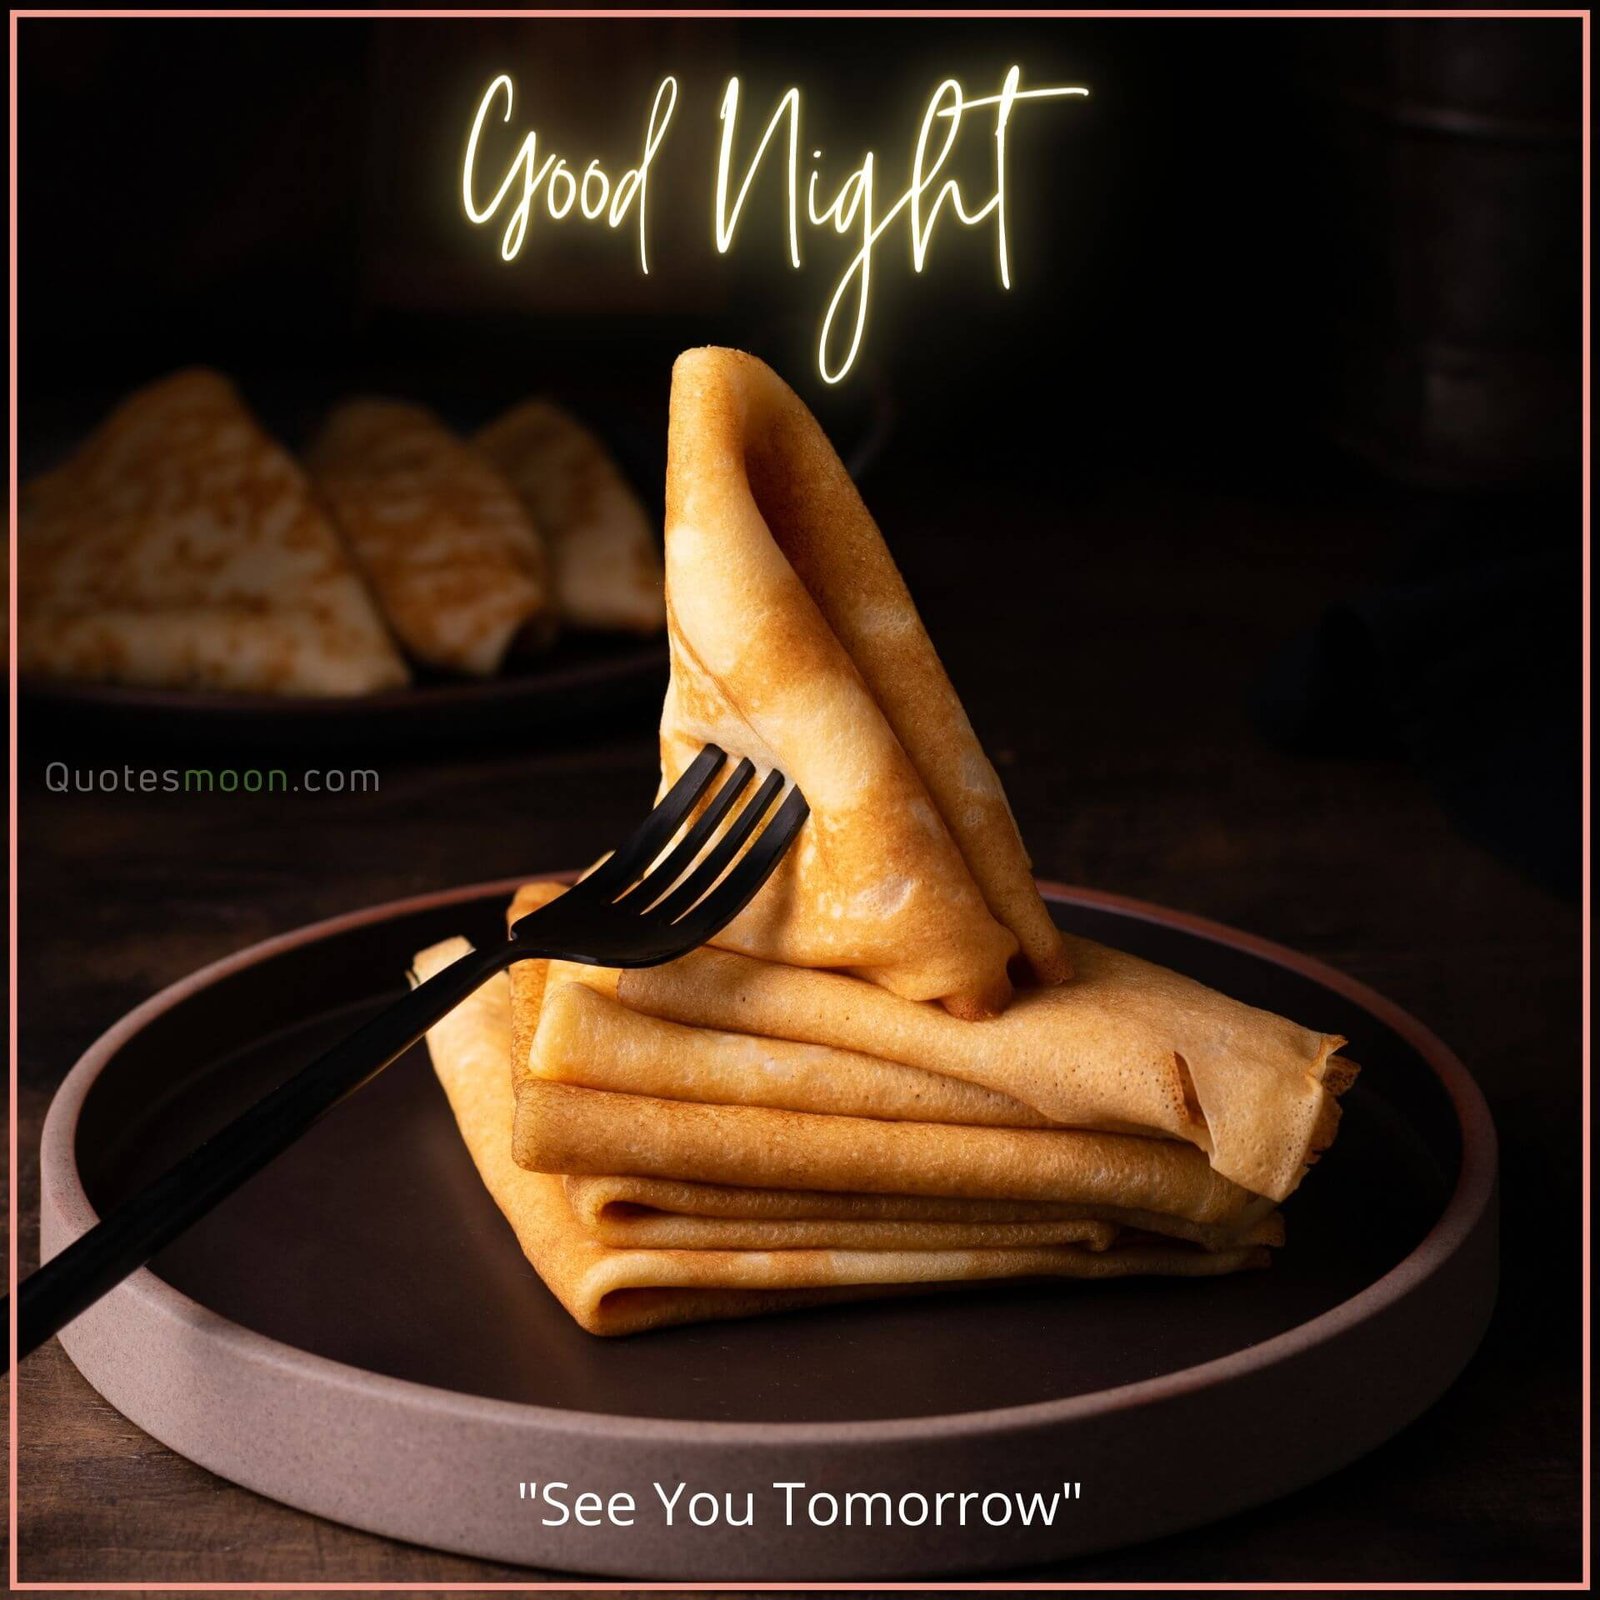 night good food wishes picture frame